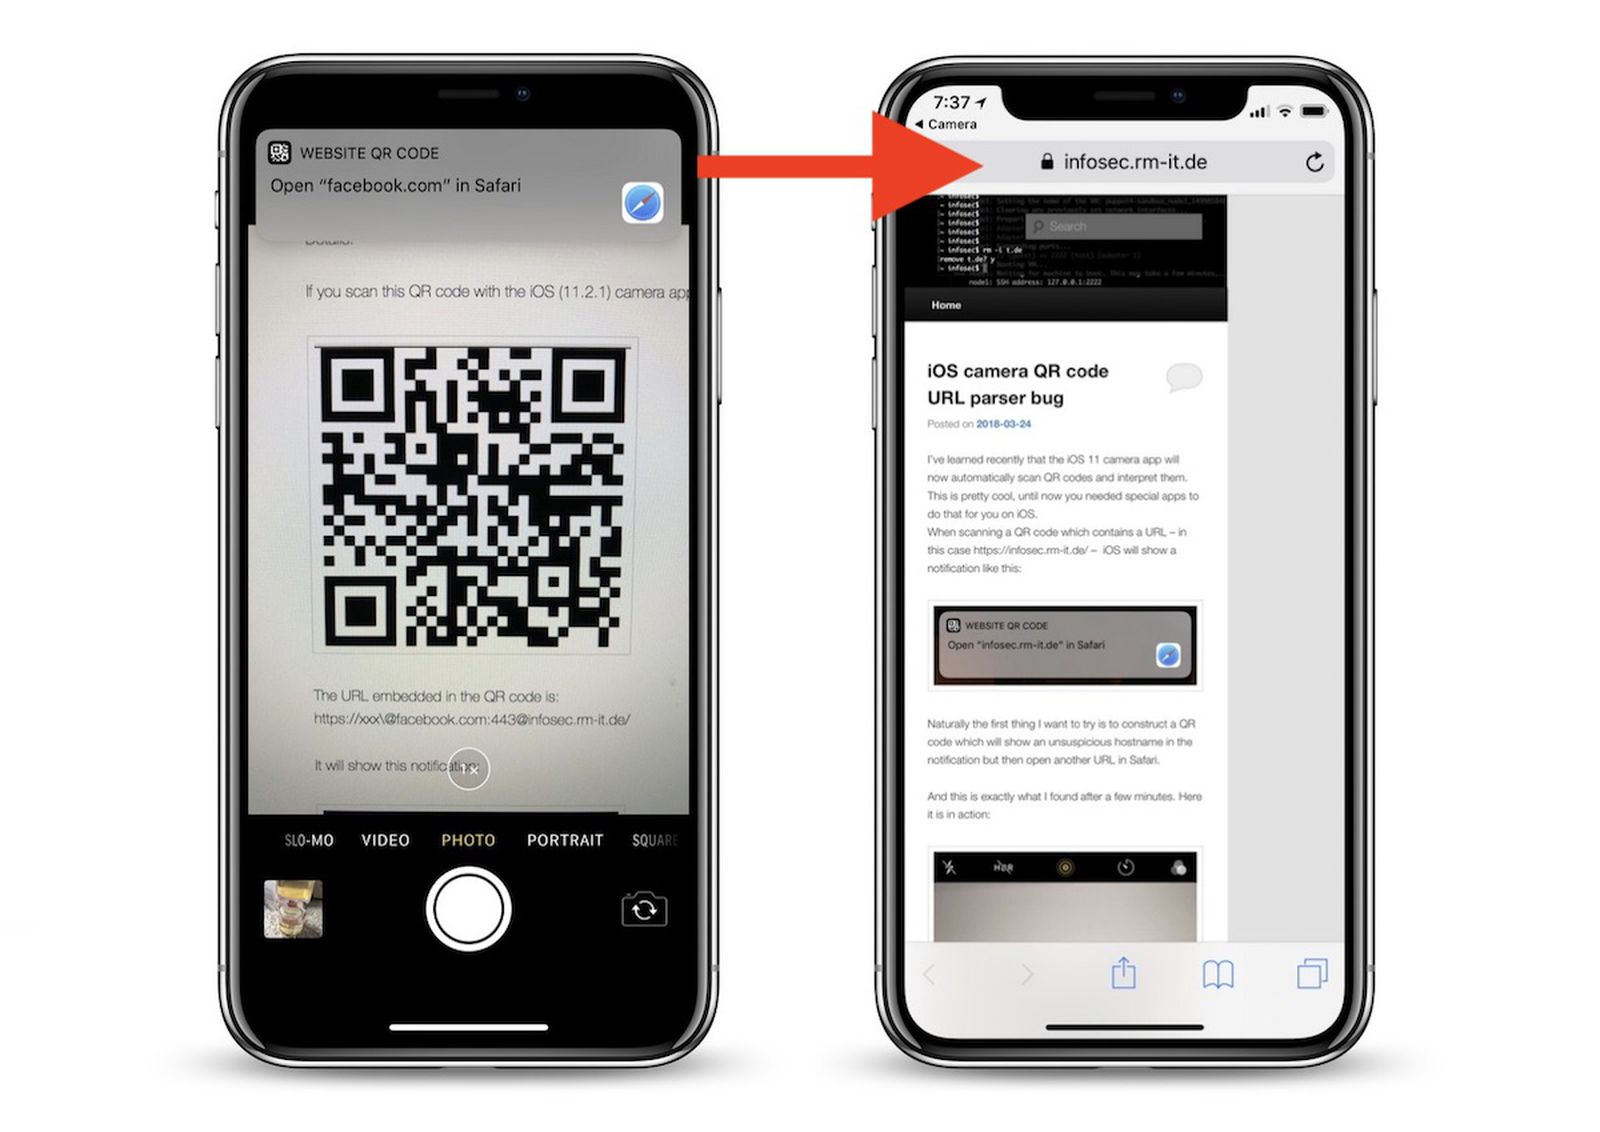 barcode-scanner-usage-tips-for-iphone-10-users